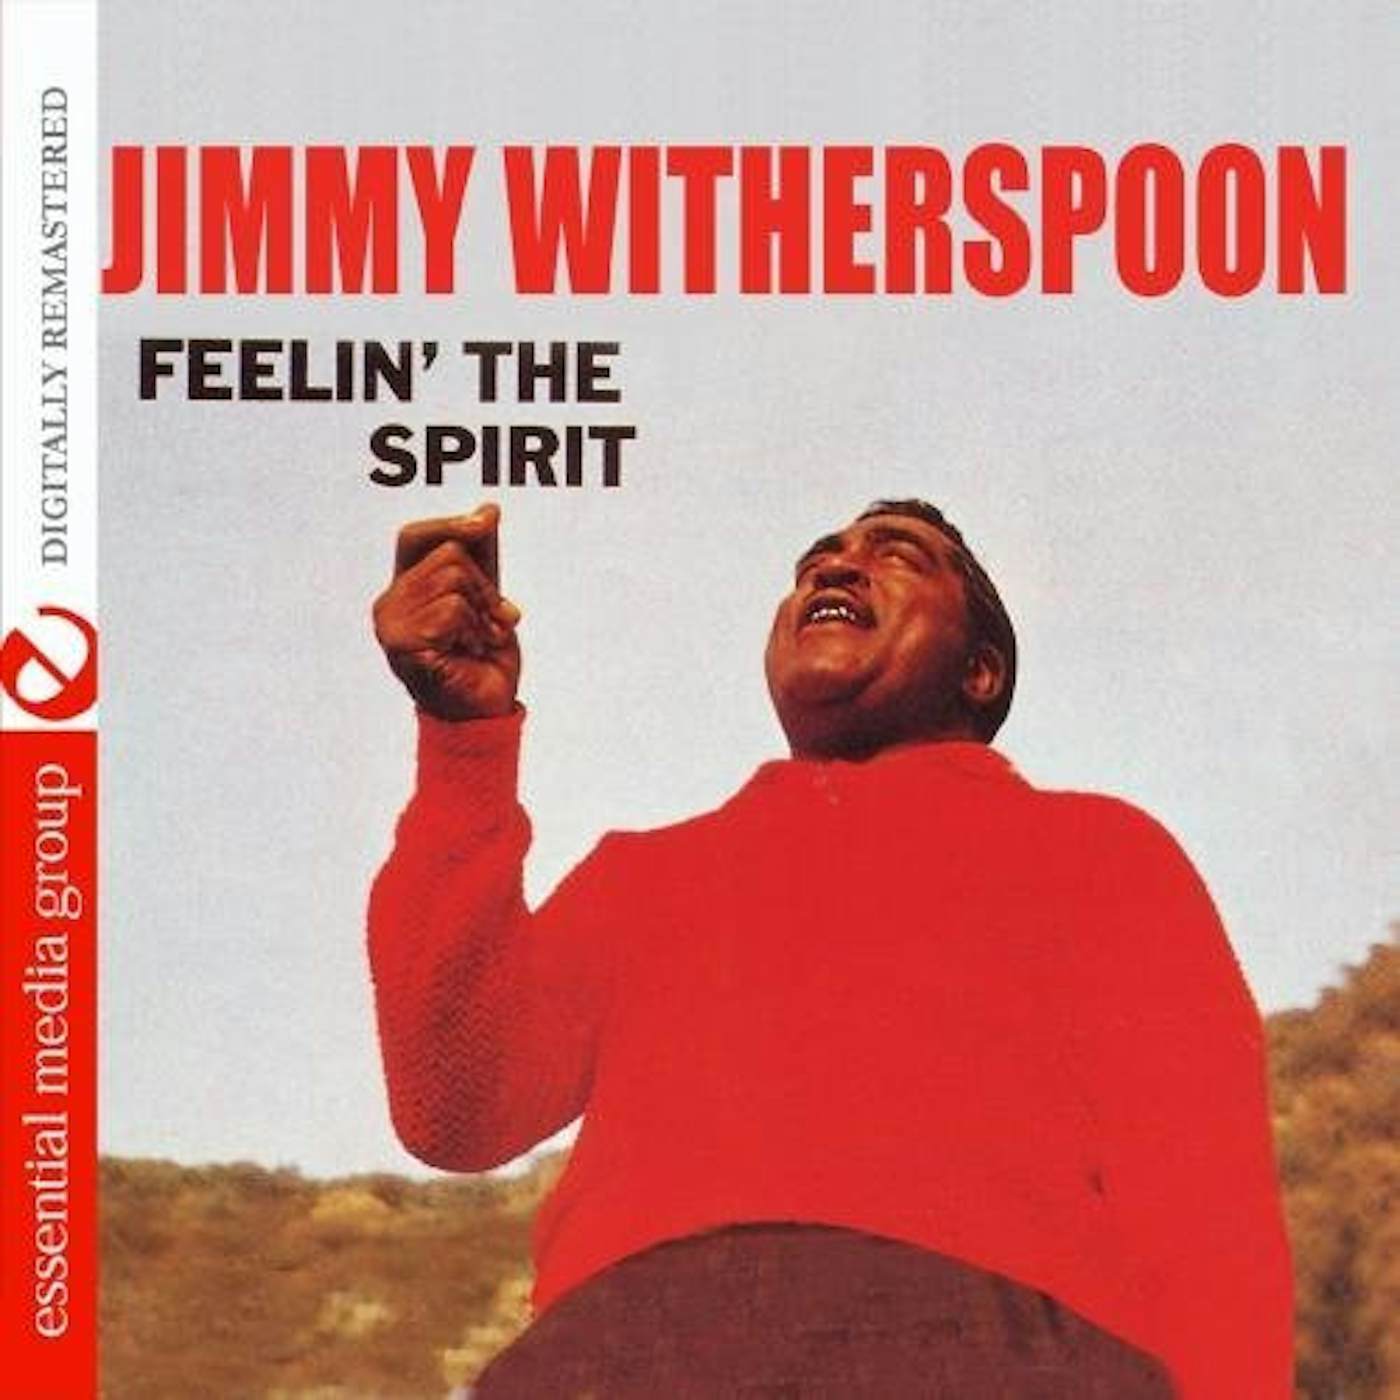 Jimmy Witherspoon FEELIN THE SPIRIT CD